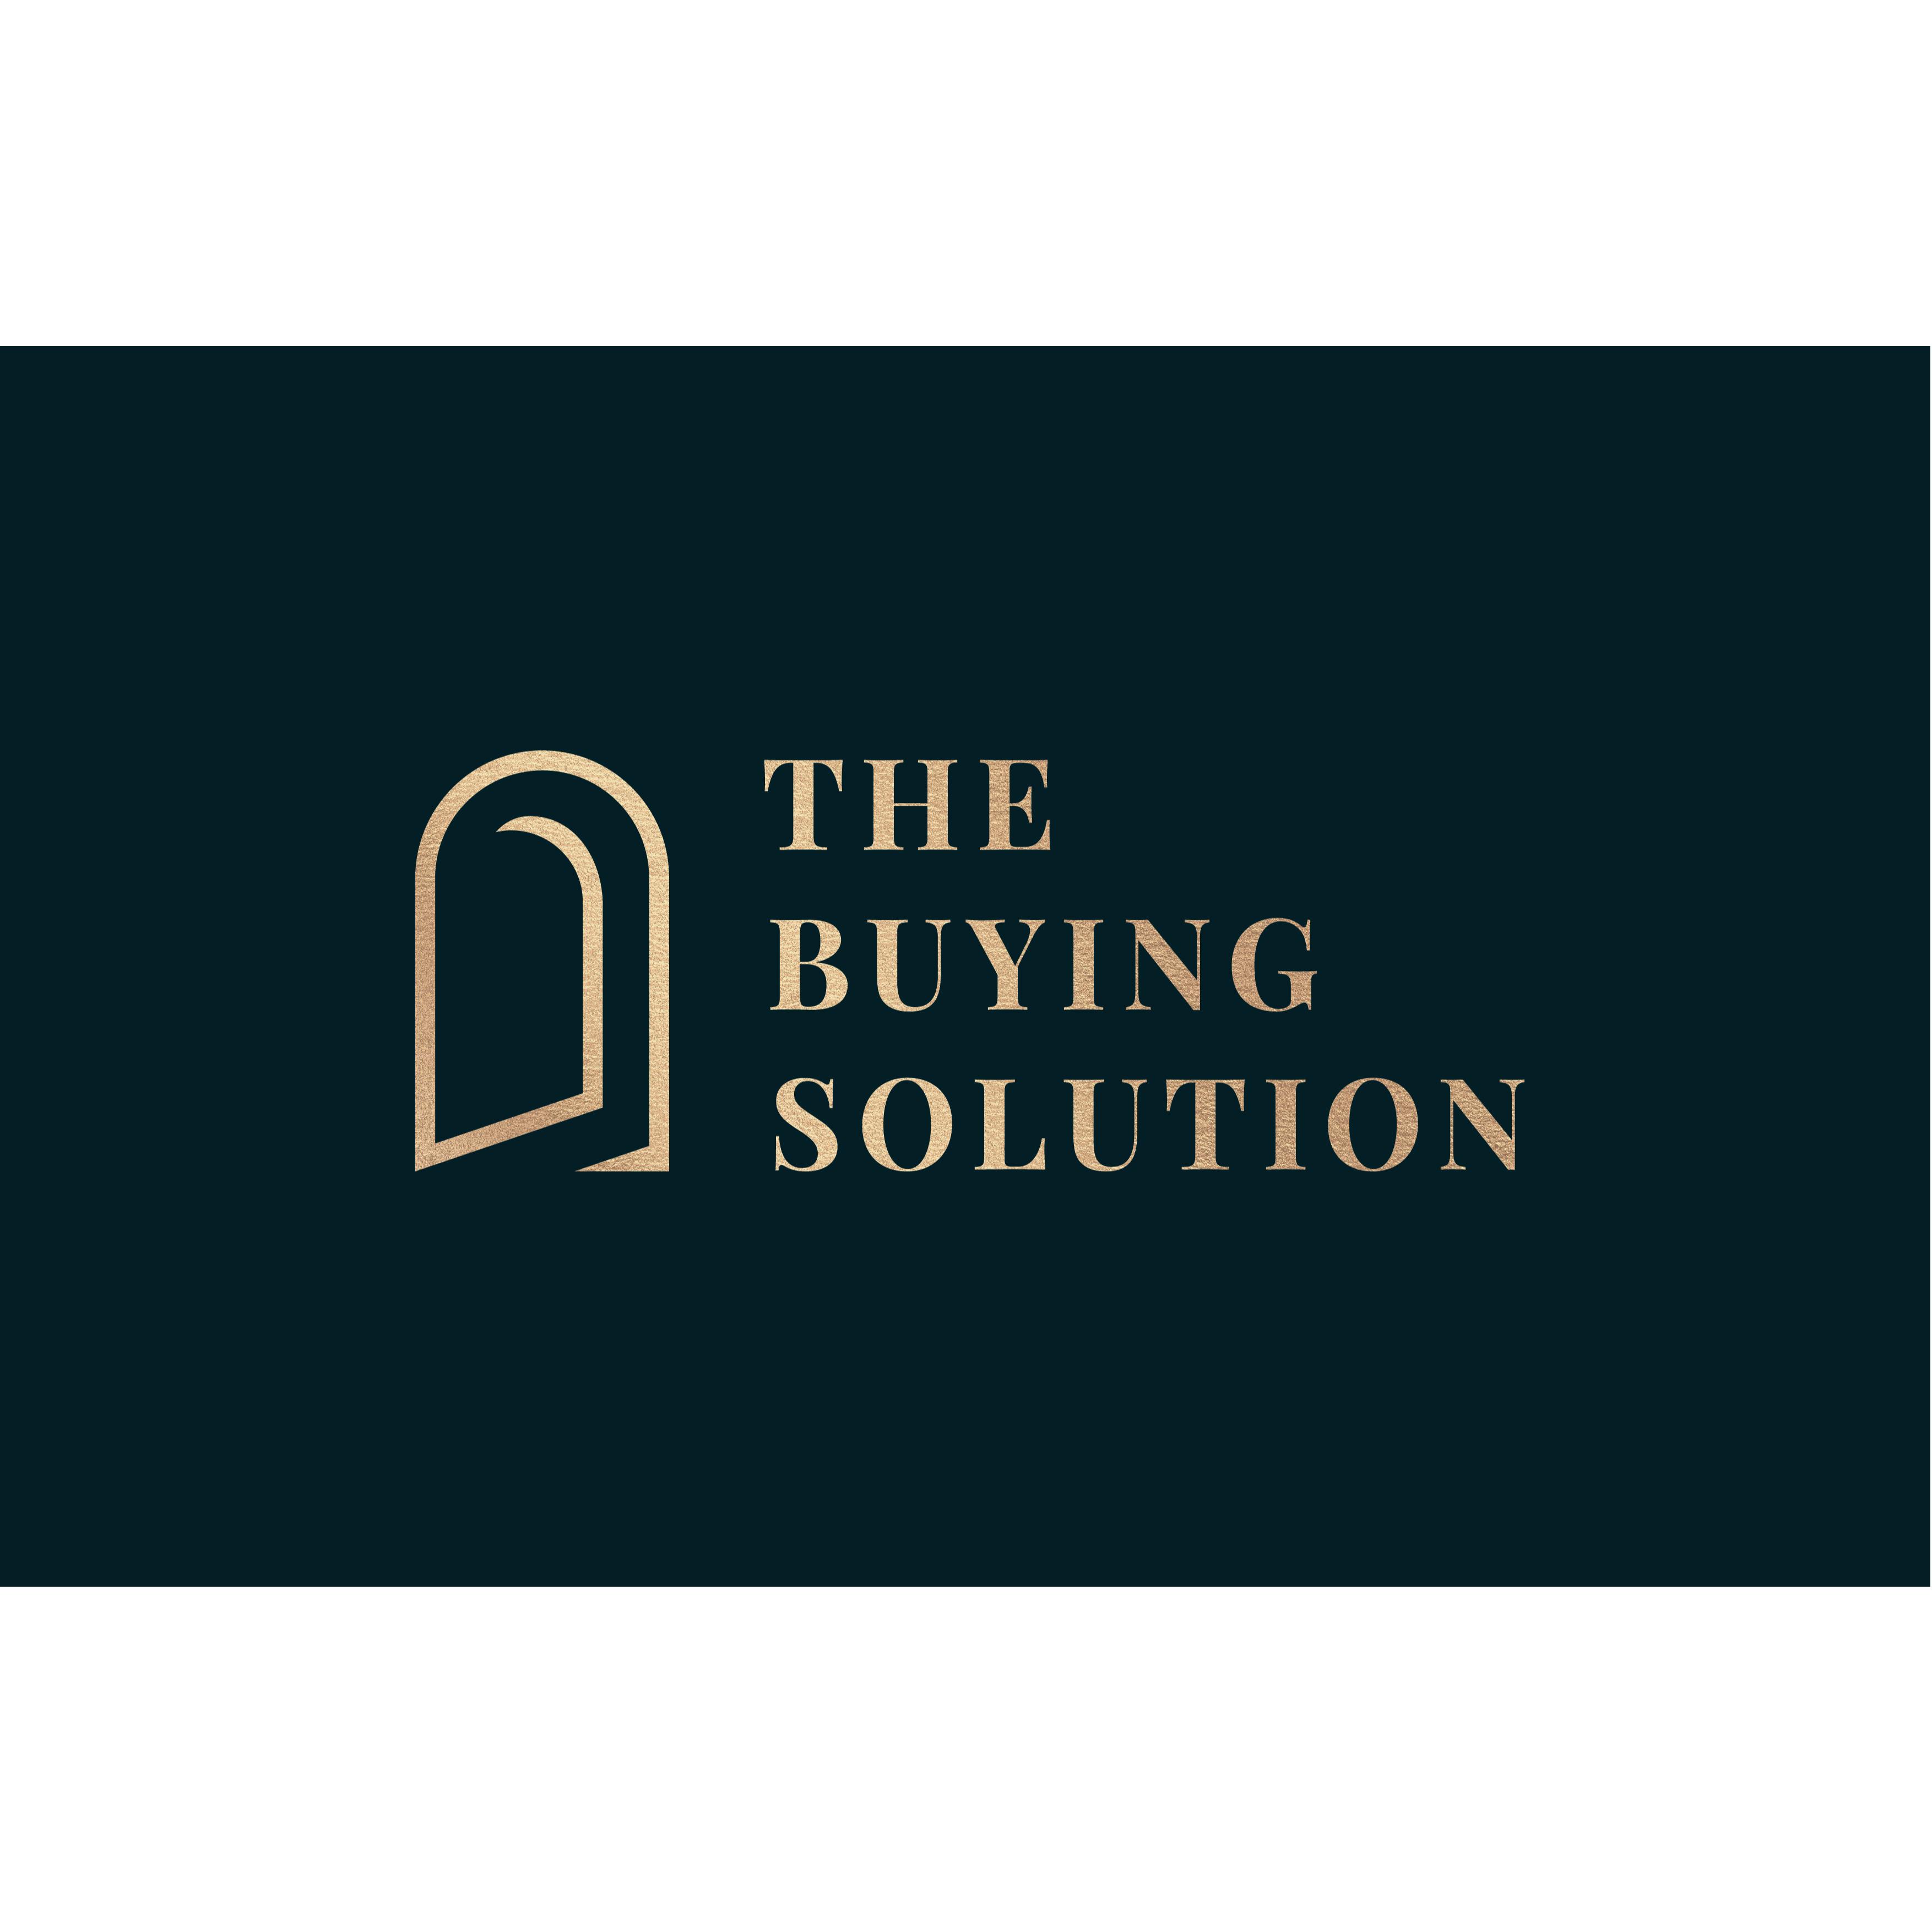 The Buying Solution London - London, London W8 4DB - 020 3925 1293 | ShowMeLocal.com